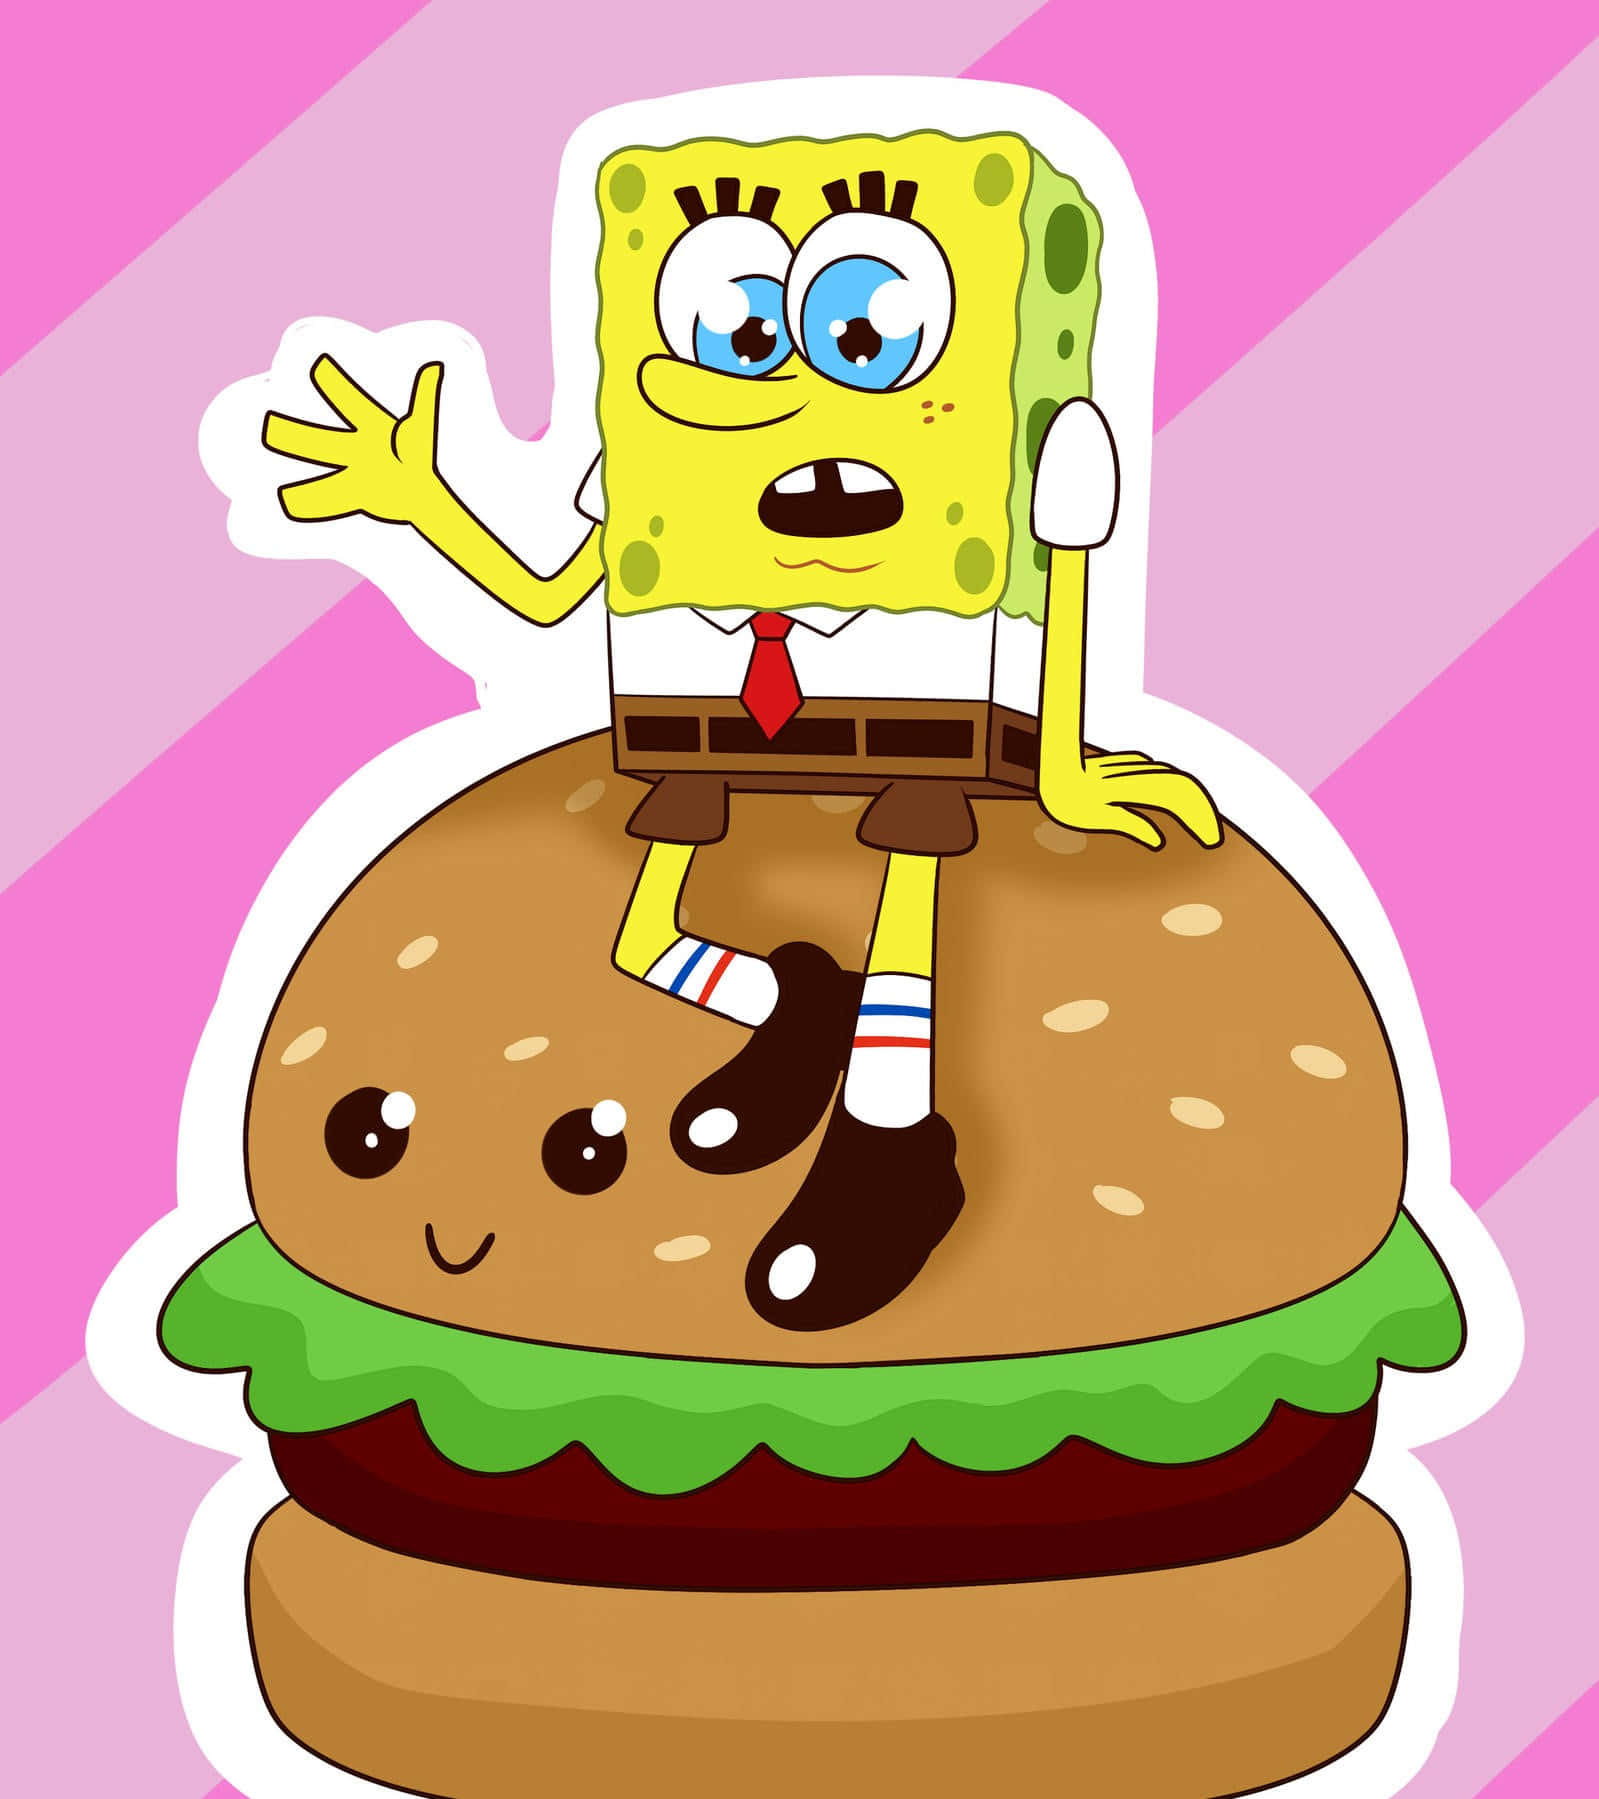 Caption: A Delicious Krabby Patty Ready to Be Served Wallpaper